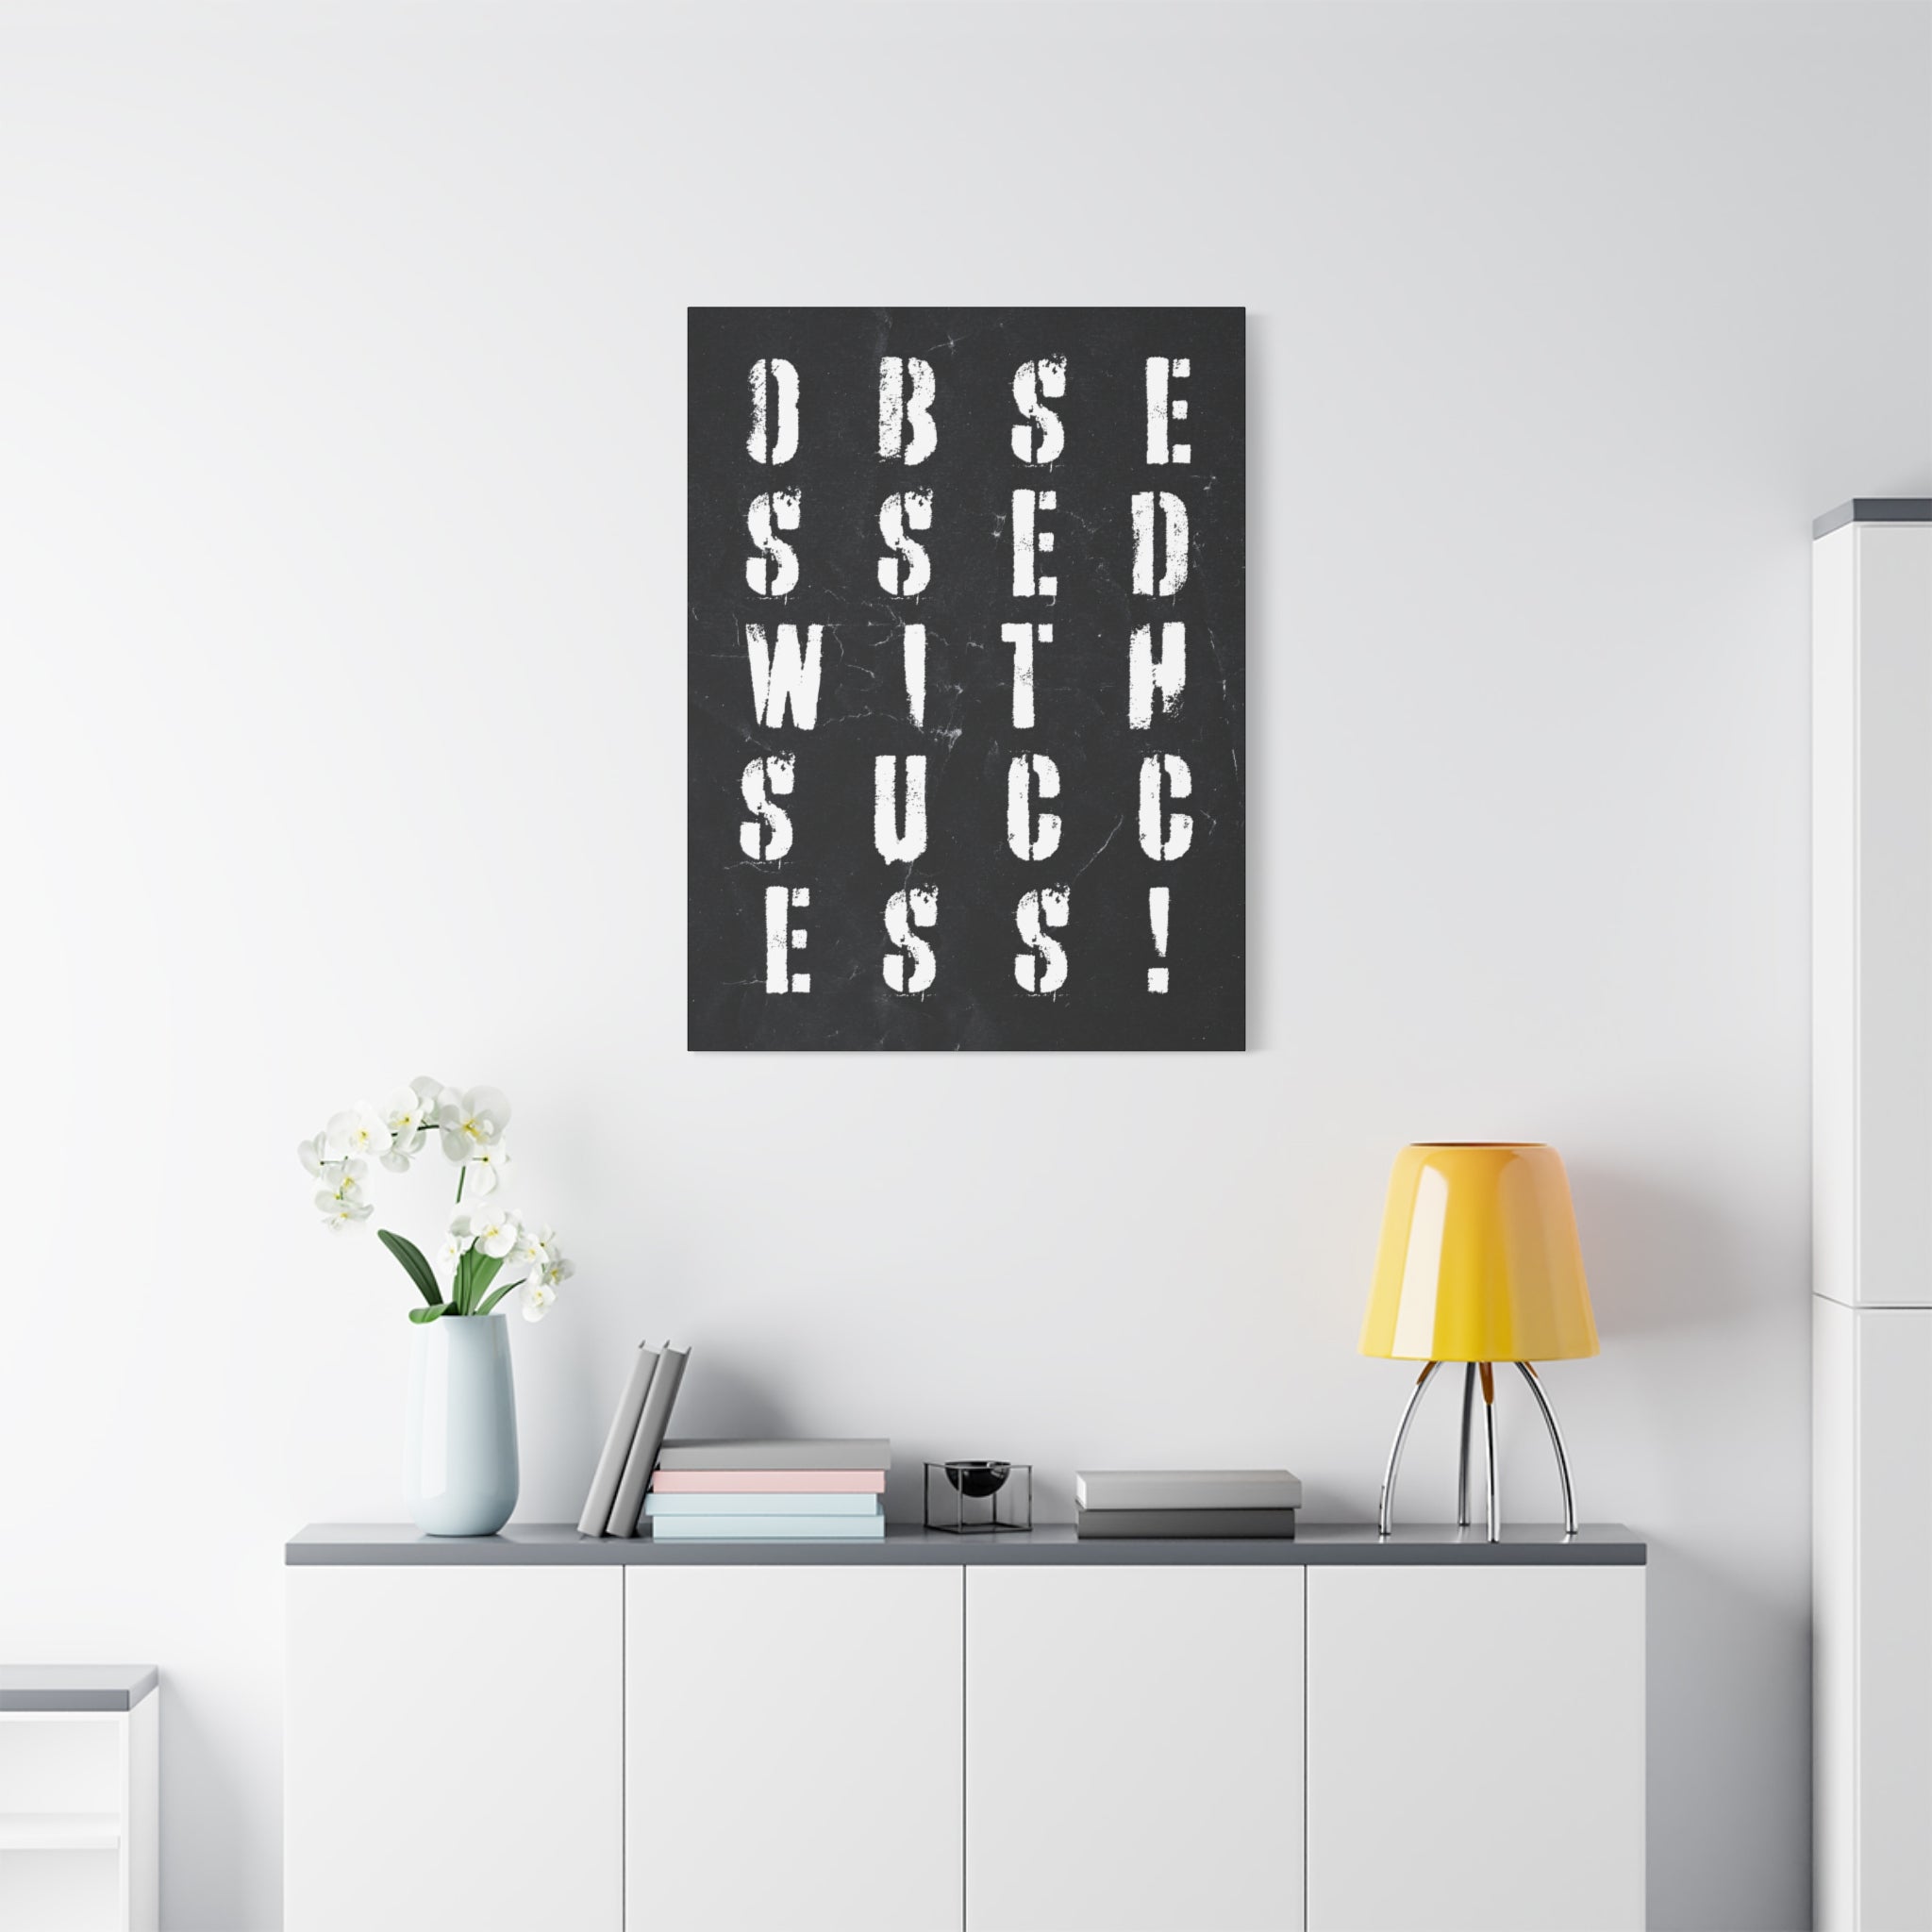 Obsessed With Success - Grid - Wall Art additional image 3